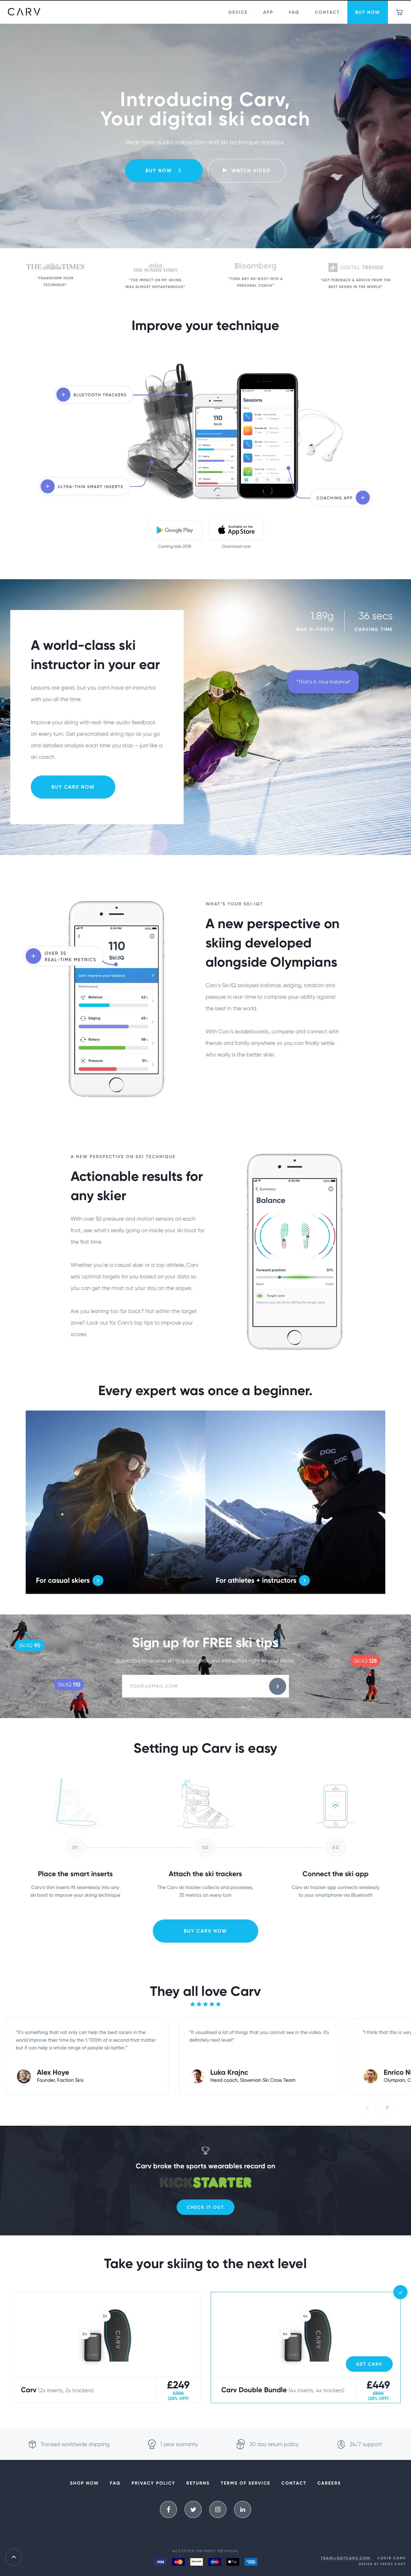 Carv Landing Page Example: Real-time audio instruction and ski technique analysis.